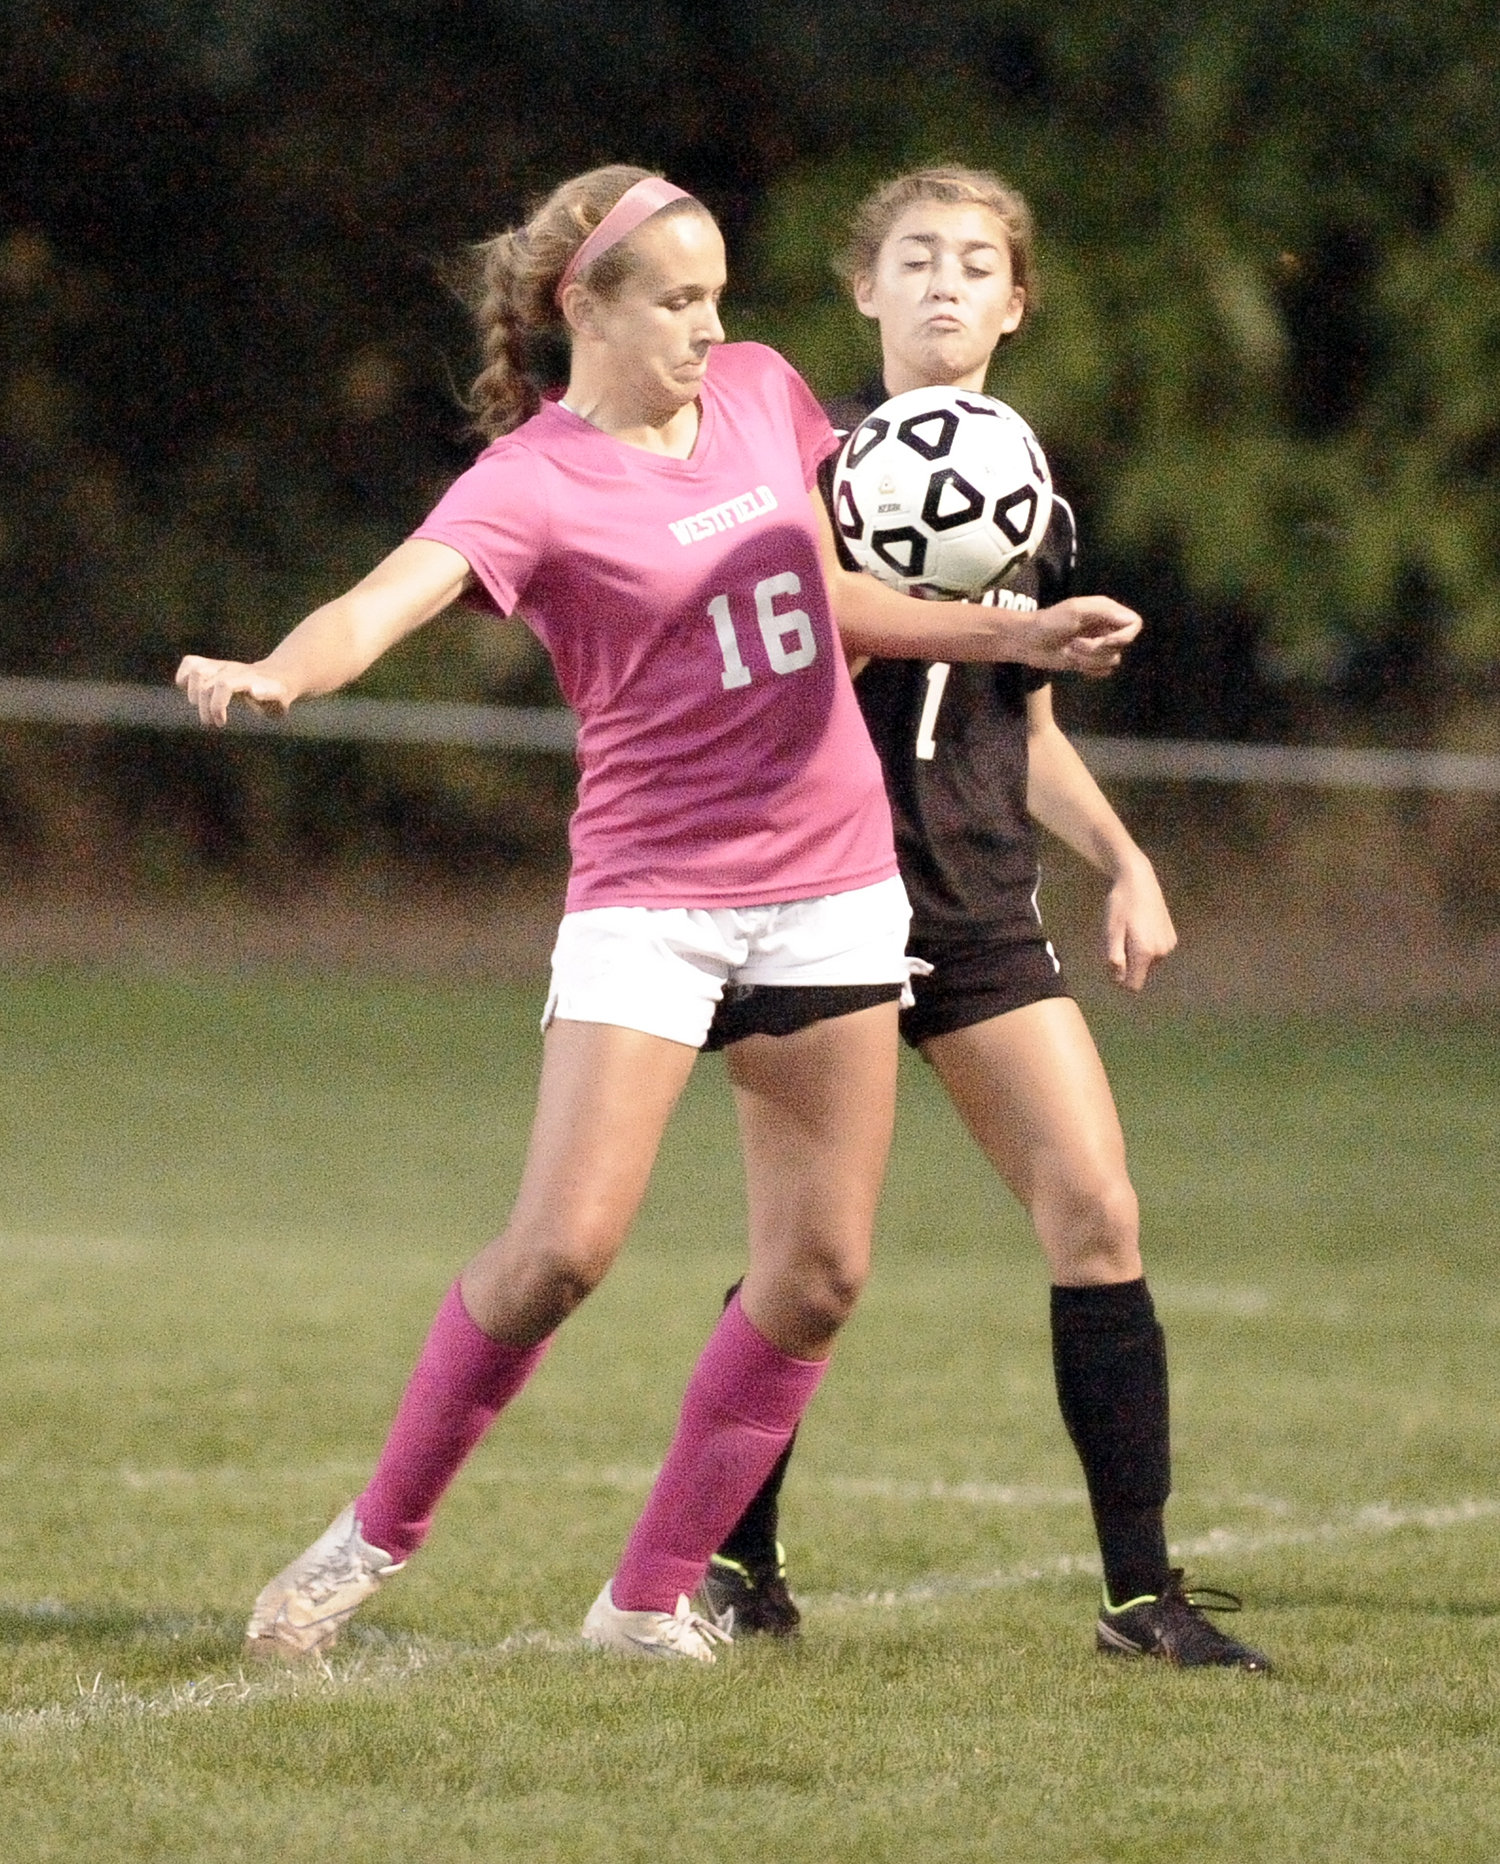 McDermott lifts WHS | The Westfield News |October 9, 2014